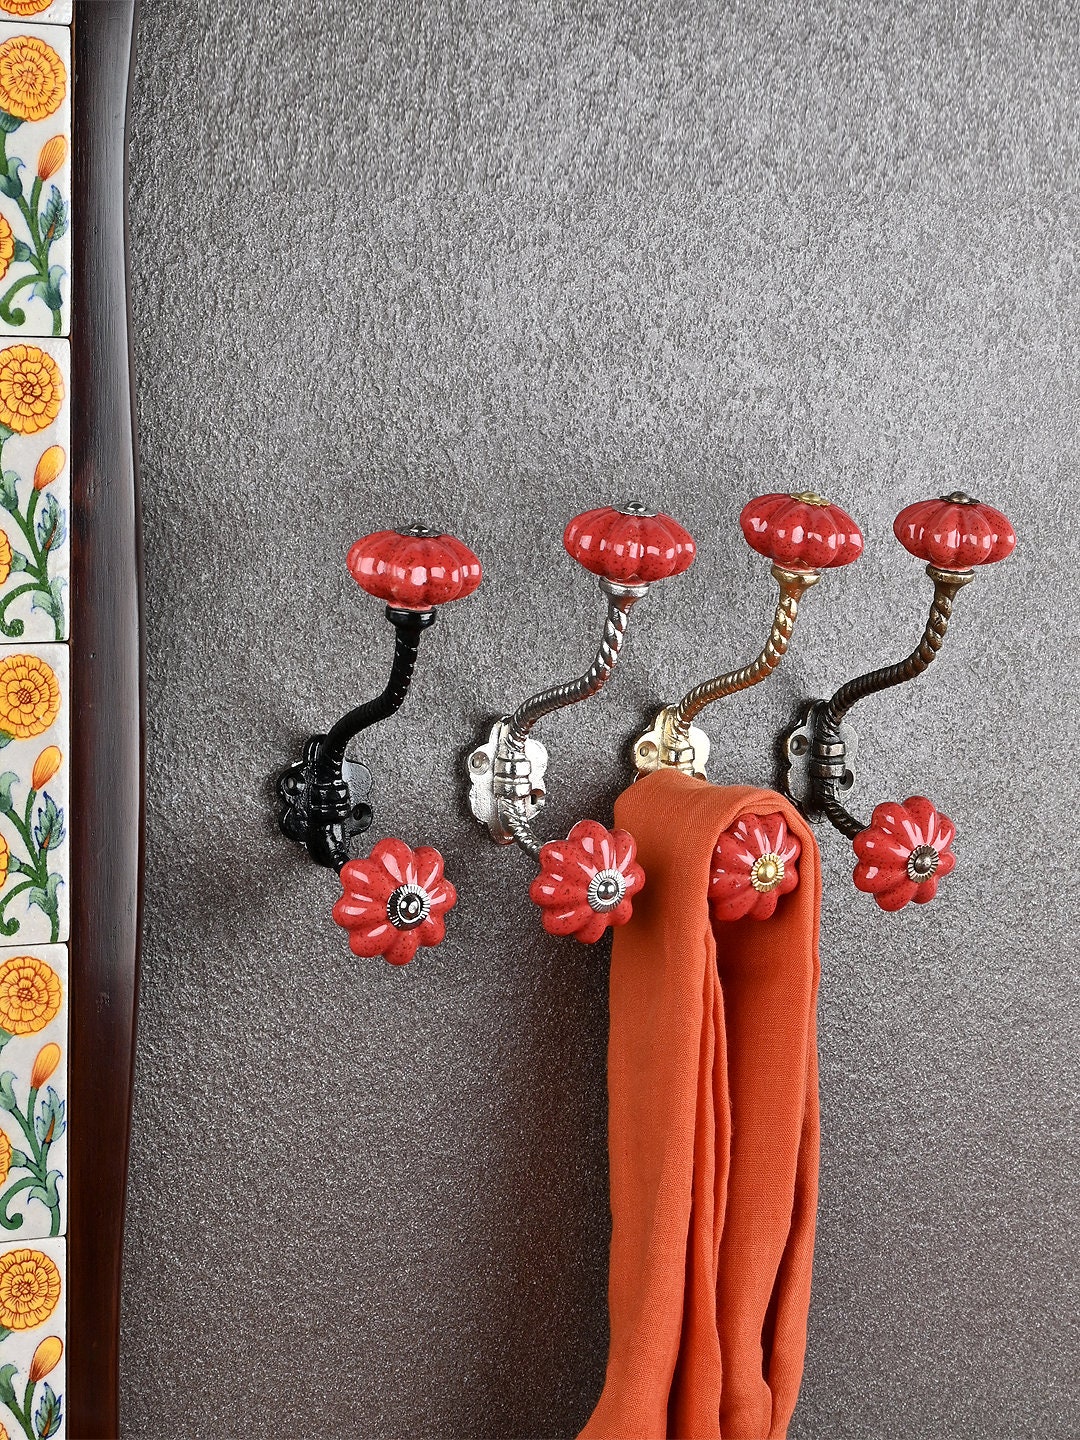 Red Co. Decorative Vintage Inspired Metal Wall Hanging Hooks — Red